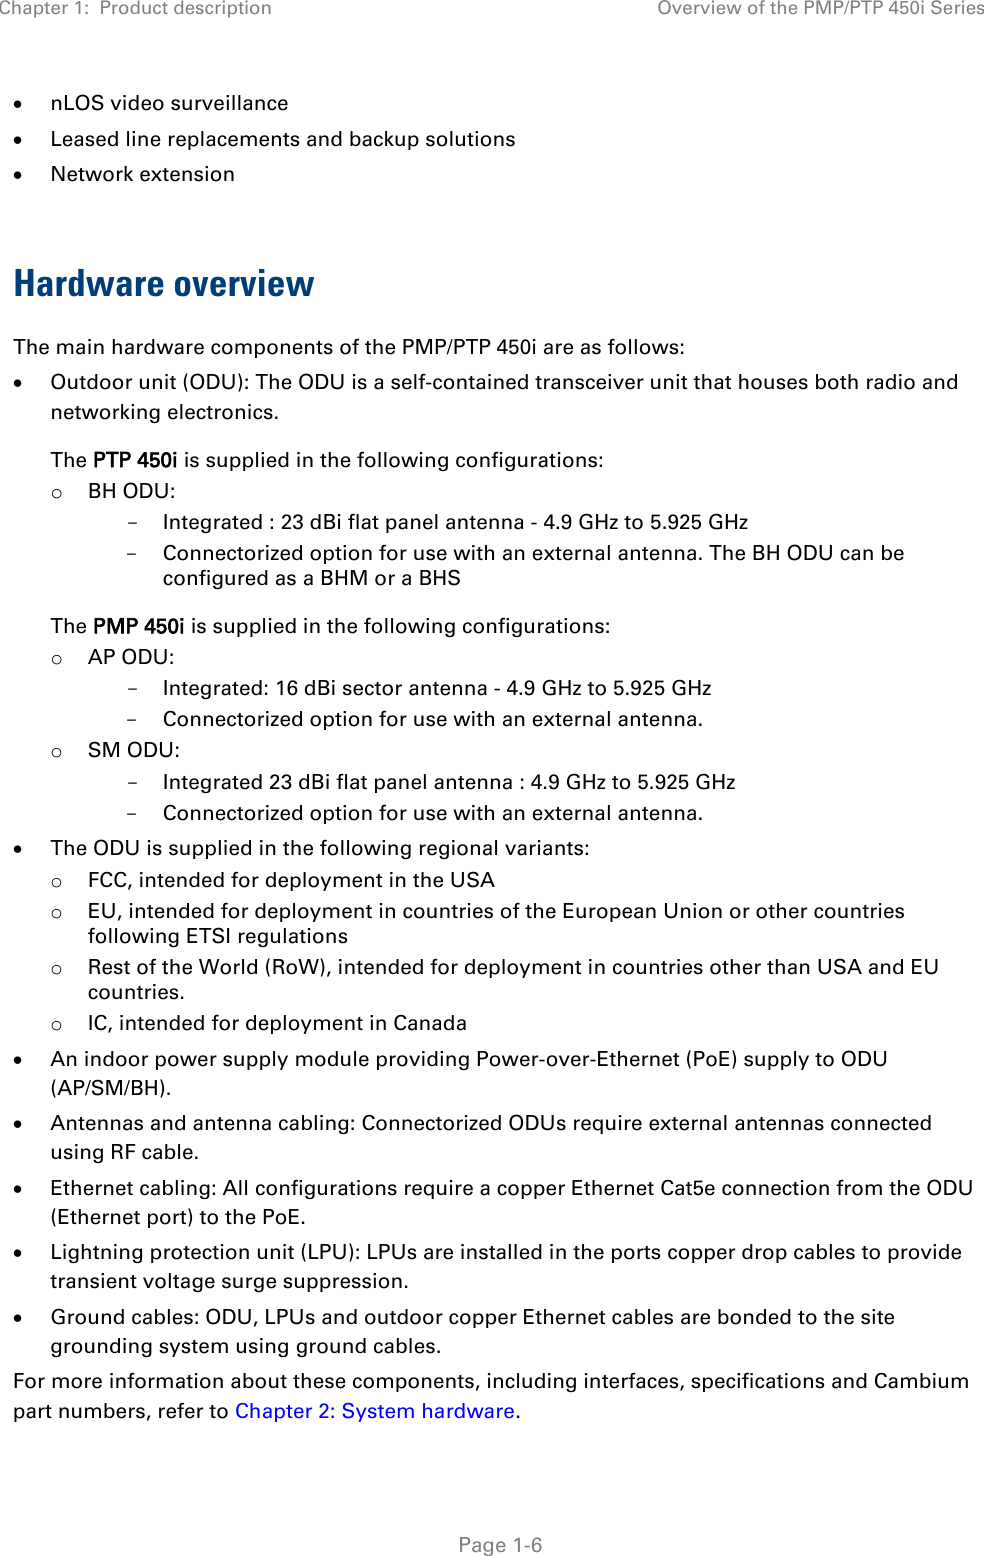 Chapter 1:  Product description Overview of the PMP/PTP 450i Series   Page 1-6 • nLOS video surveillance • Leased line replacements and backup solutions • Network extension  Hardware overview The main hardware components of the PMP/PTP 450i are as follows: • Outdoor unit (ODU): The ODU is a self-contained transceiver unit that houses both radio and networking electronics.  The PTP 450i is supplied in the following configurations: o BH ODU: - Integrated : 23 dBi flat panel antenna - 4.9 GHz to 5.925 GHz - Connectorized option for use with an external antenna. The BH ODU can be configured as a BHM or a BHS The PMP 450i is supplied in the following configurations: o AP ODU:  - Integrated: 16 dBi sector antenna - 4.9 GHz to 5.925 GHz - Connectorized option for use with an external antenna. o SM ODU: - Integrated 23 dBi flat panel antenna : 4.9 GHz to 5.925 GHz - Connectorized option for use with an external antenna. • The ODU is supplied in the following regional variants: o FCC, intended for deployment in the USA o EU, intended for deployment in countries of the European Union or other countries following ETSI regulations o Rest of the World (RoW), intended for deployment in countries other than USA and EU countries. o IC, intended for deployment in Canada • An indoor power supply module providing Power-over-Ethernet (PoE) supply to ODU (AP/SM/BH). • Antennas and antenna cabling: Connectorized ODUs require external antennas connected using RF cable. • Ethernet cabling: All configurations require a copper Ethernet Cat5e connection from the ODU (Ethernet port) to the PoE.  • Lightning protection unit (LPU): LPUs are installed in the ports copper drop cables to provide transient voltage surge suppression. • Ground cables: ODU, LPUs and outdoor copper Ethernet cables are bonded to the site grounding system using ground cables. For more information about these components, including interfaces, specifications and Cambium part numbers, refer to Chapter 2: System hardware. 